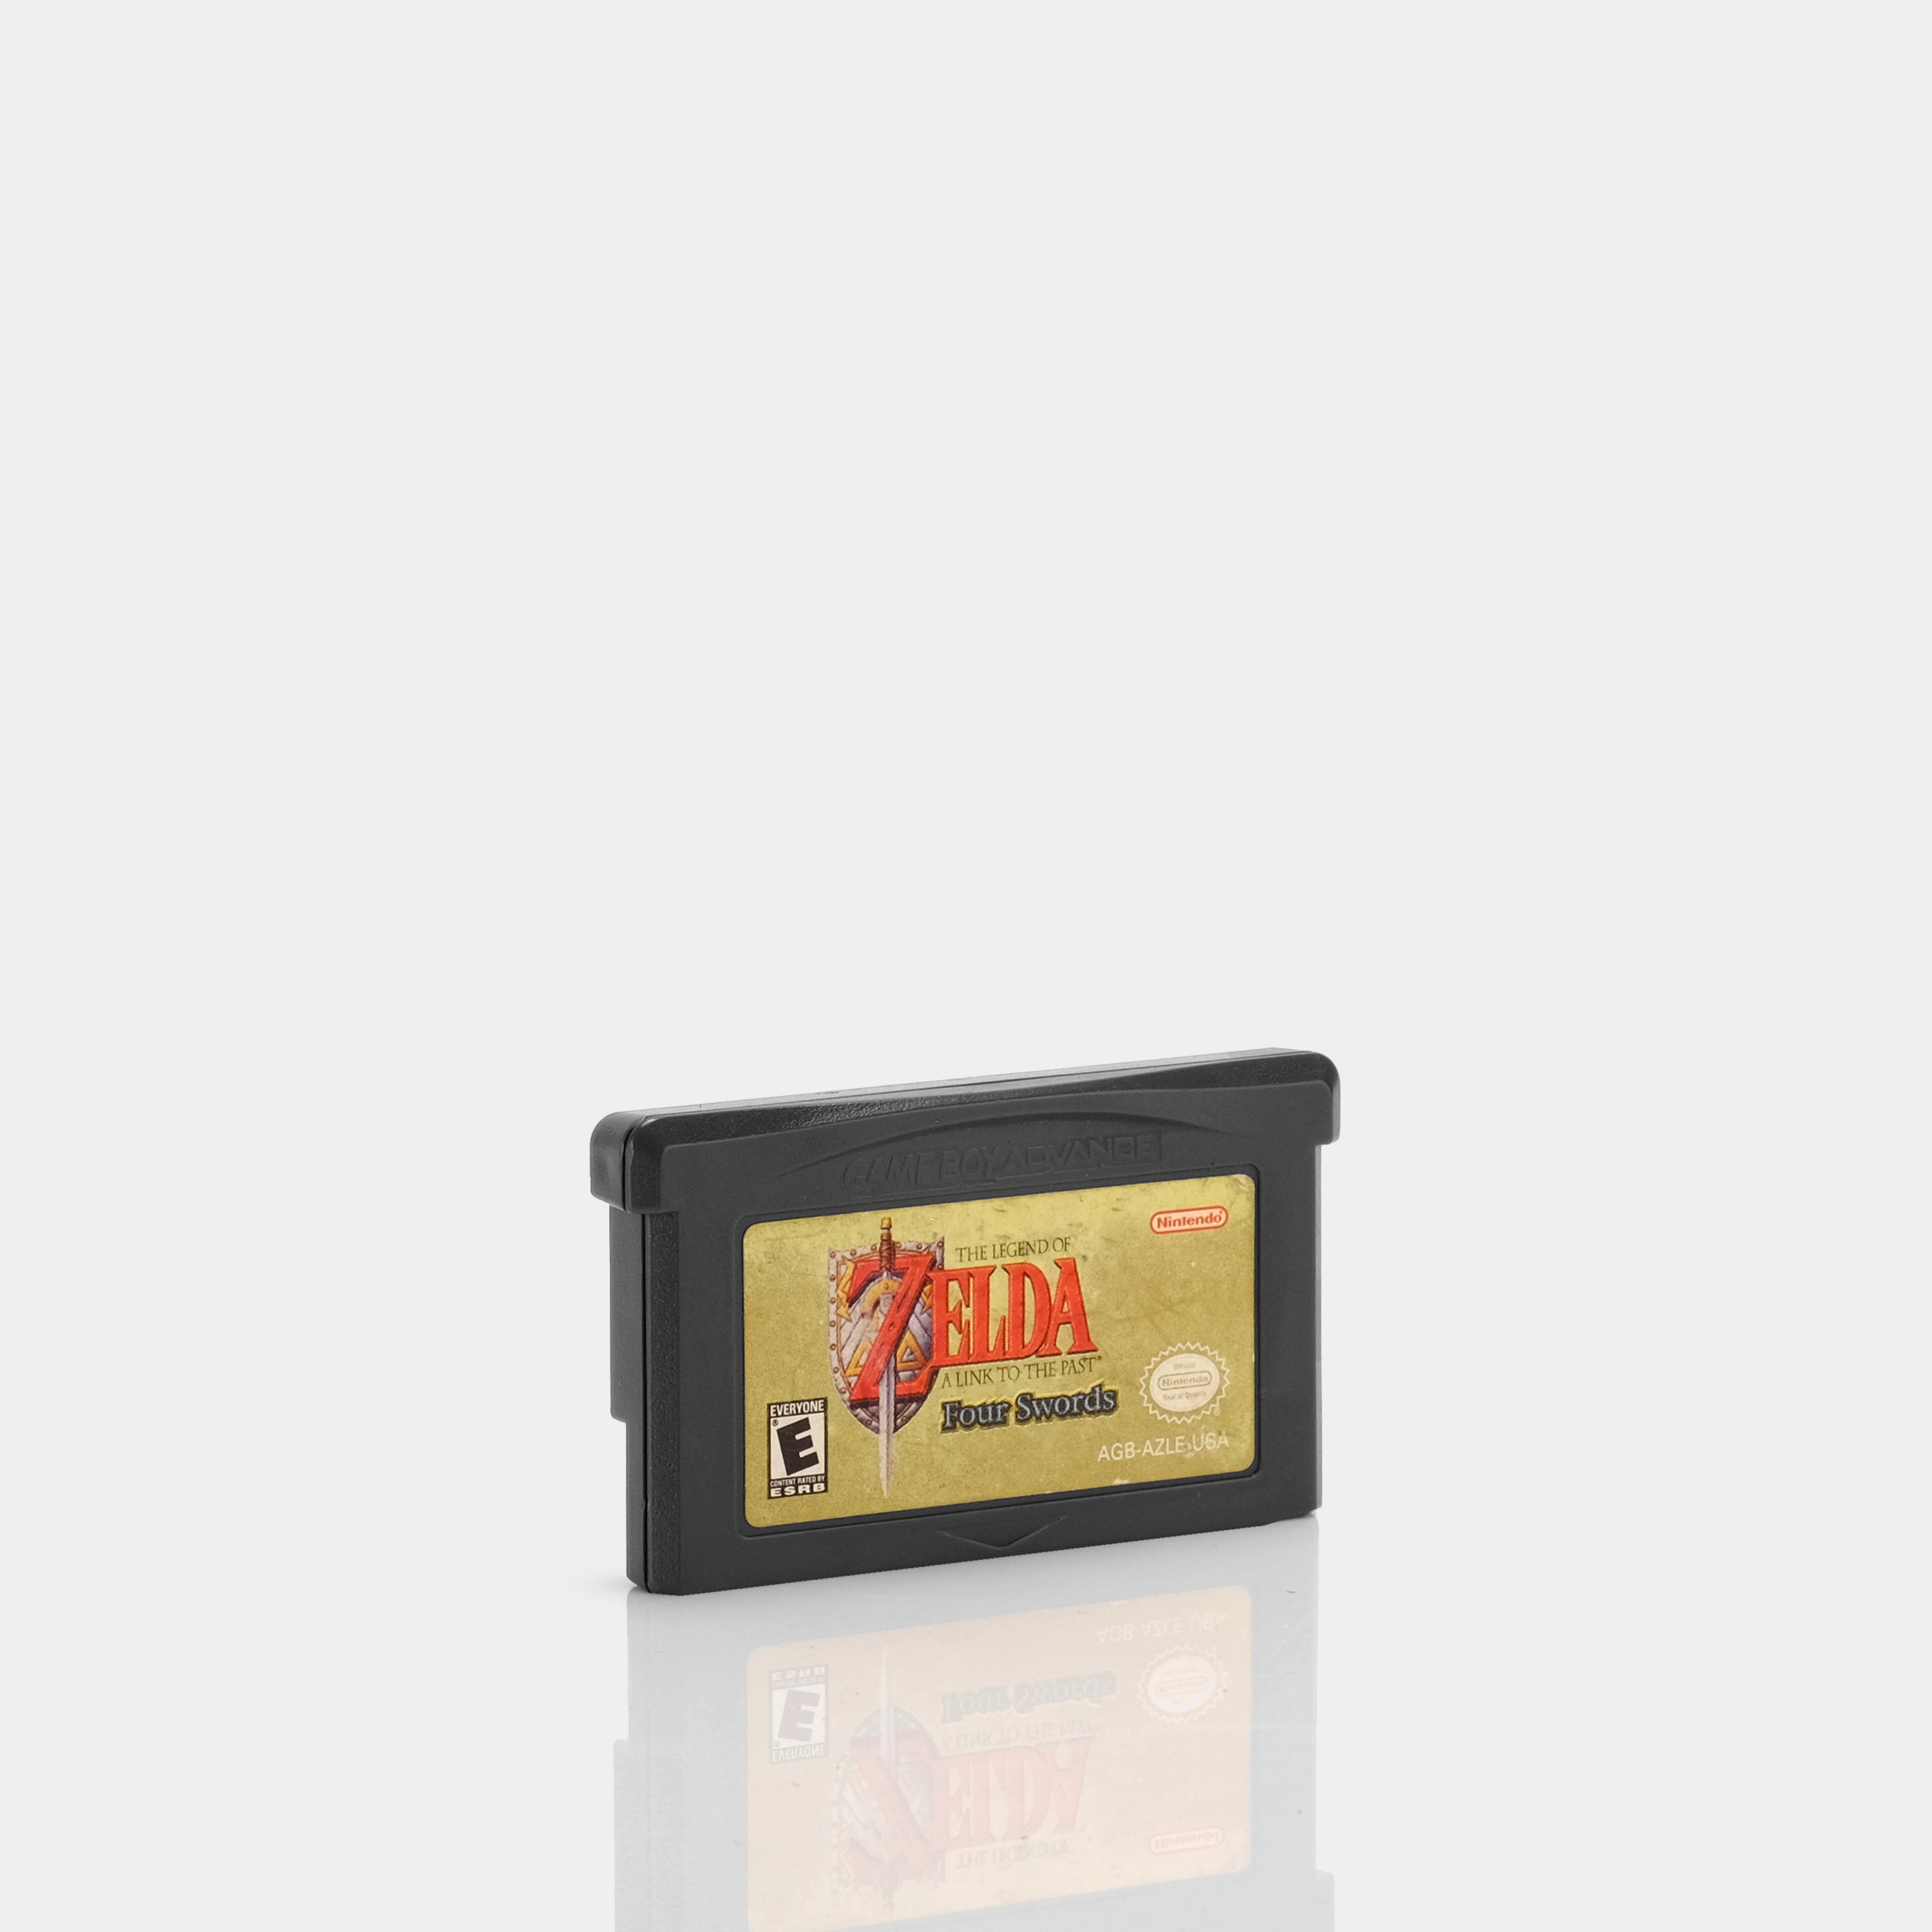  The Legend of Zelda: A Link to the Past (Includes Four